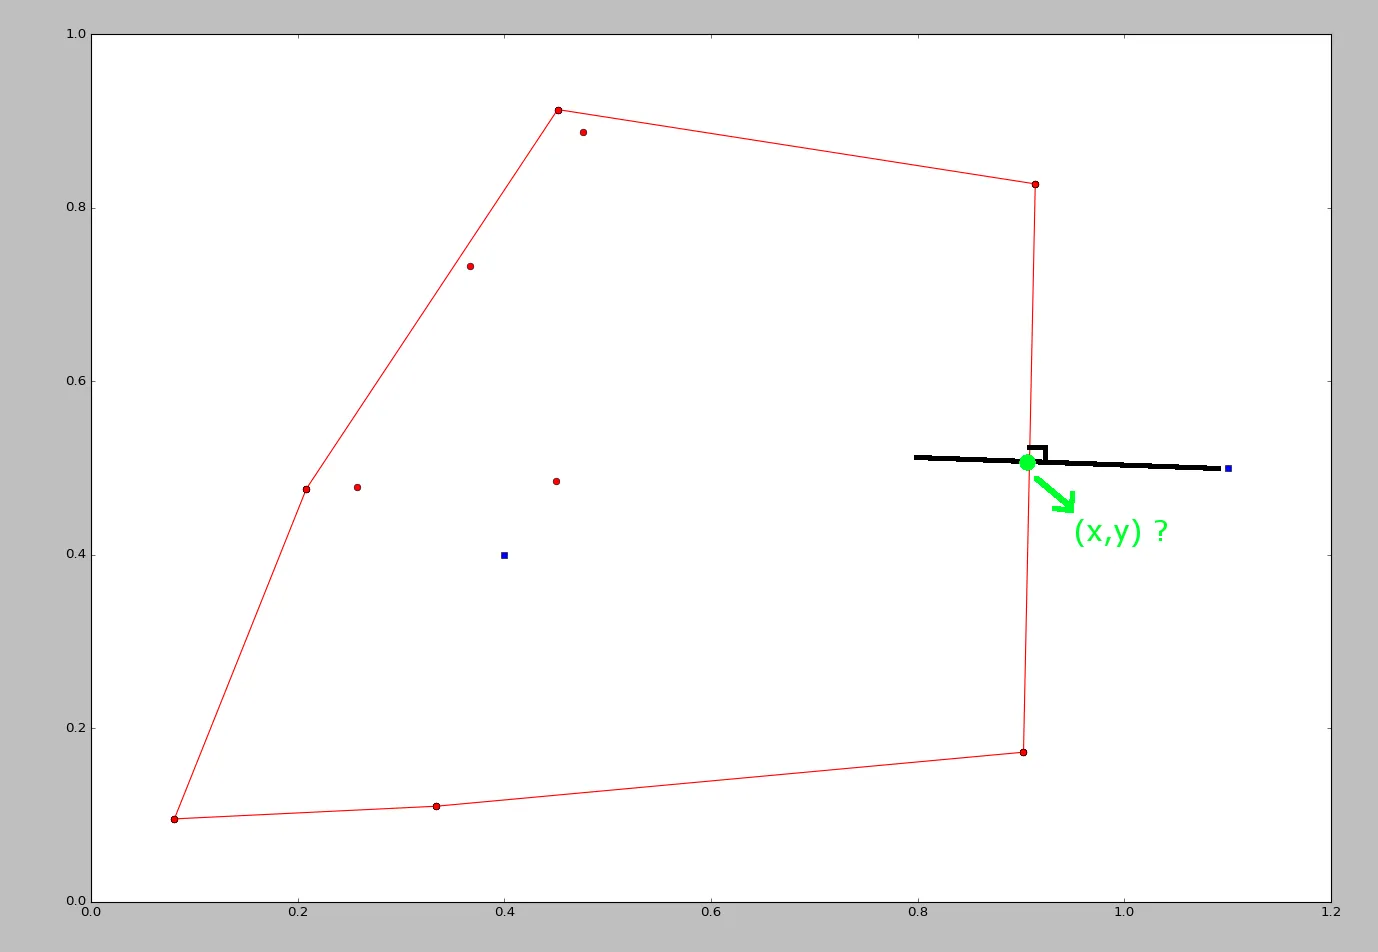 Convex hull and point to obtain in green